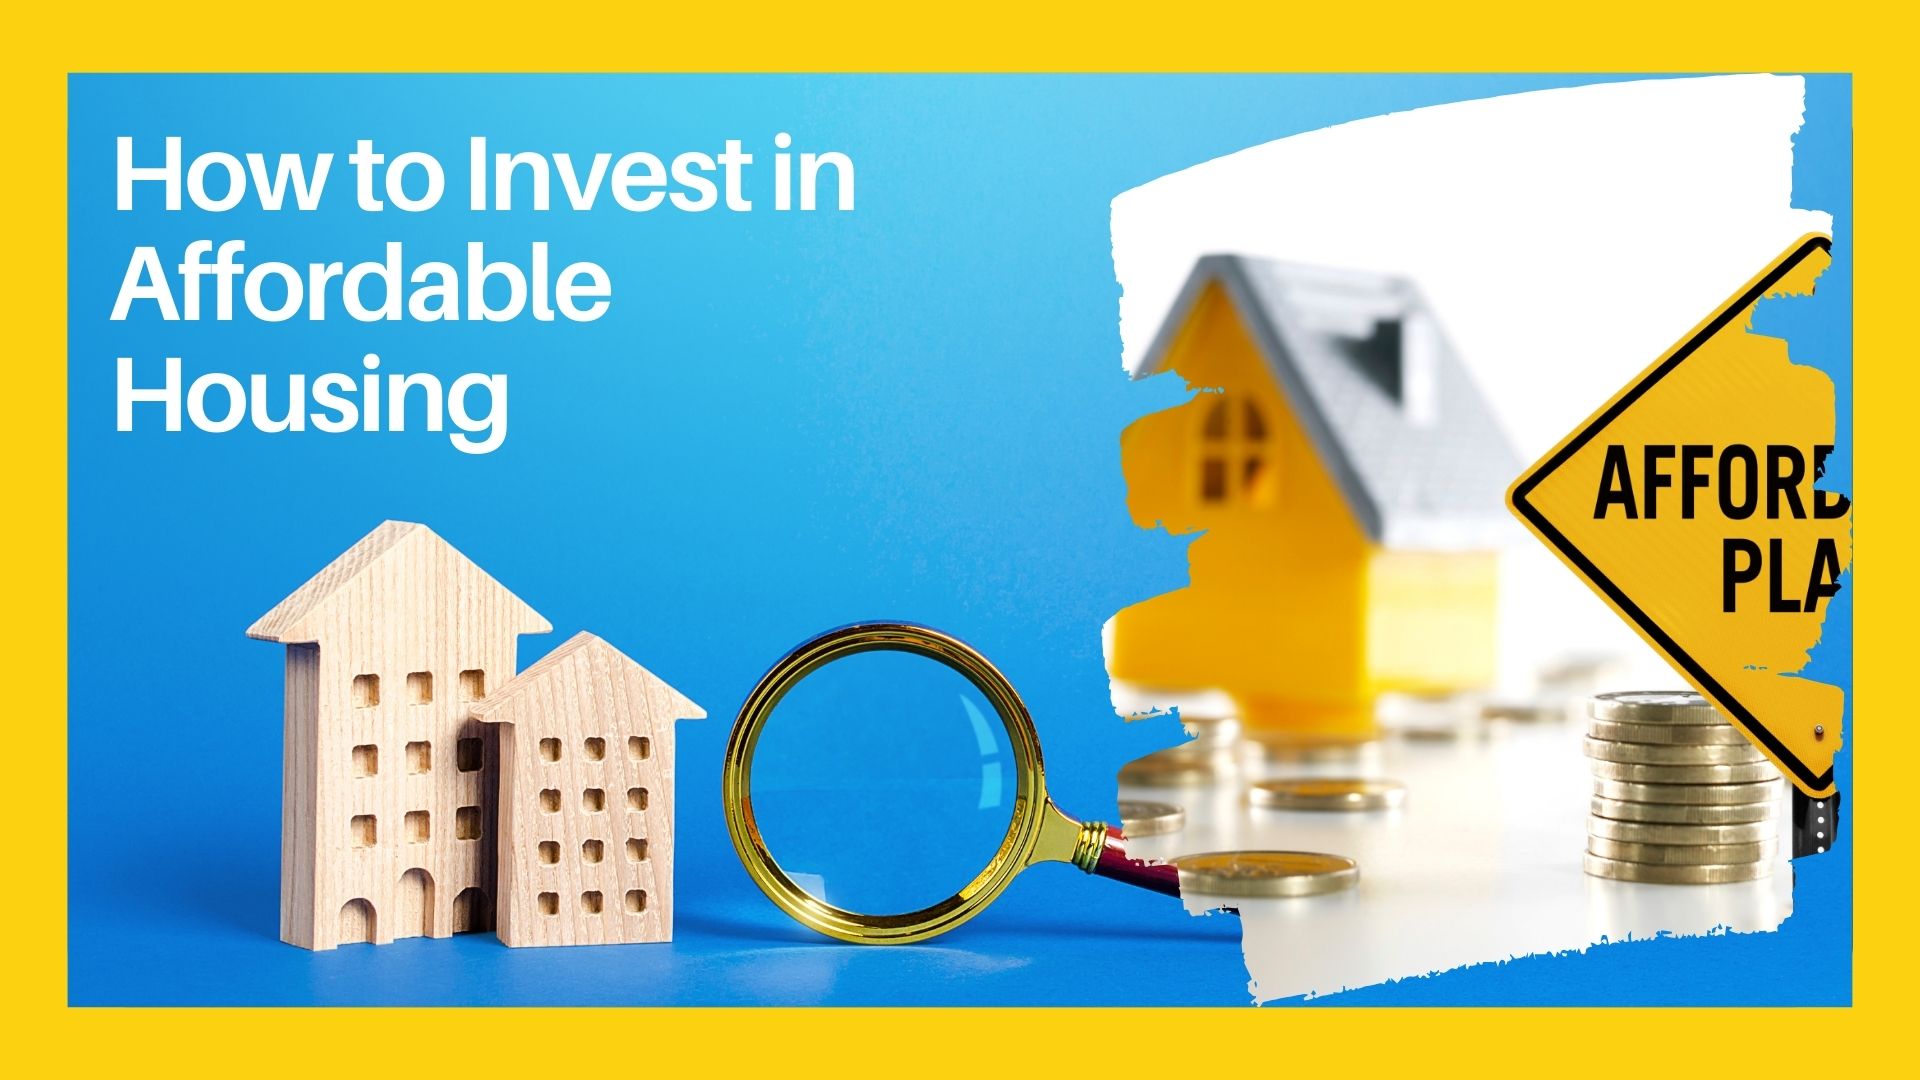 How to Invest in Affordable Housing